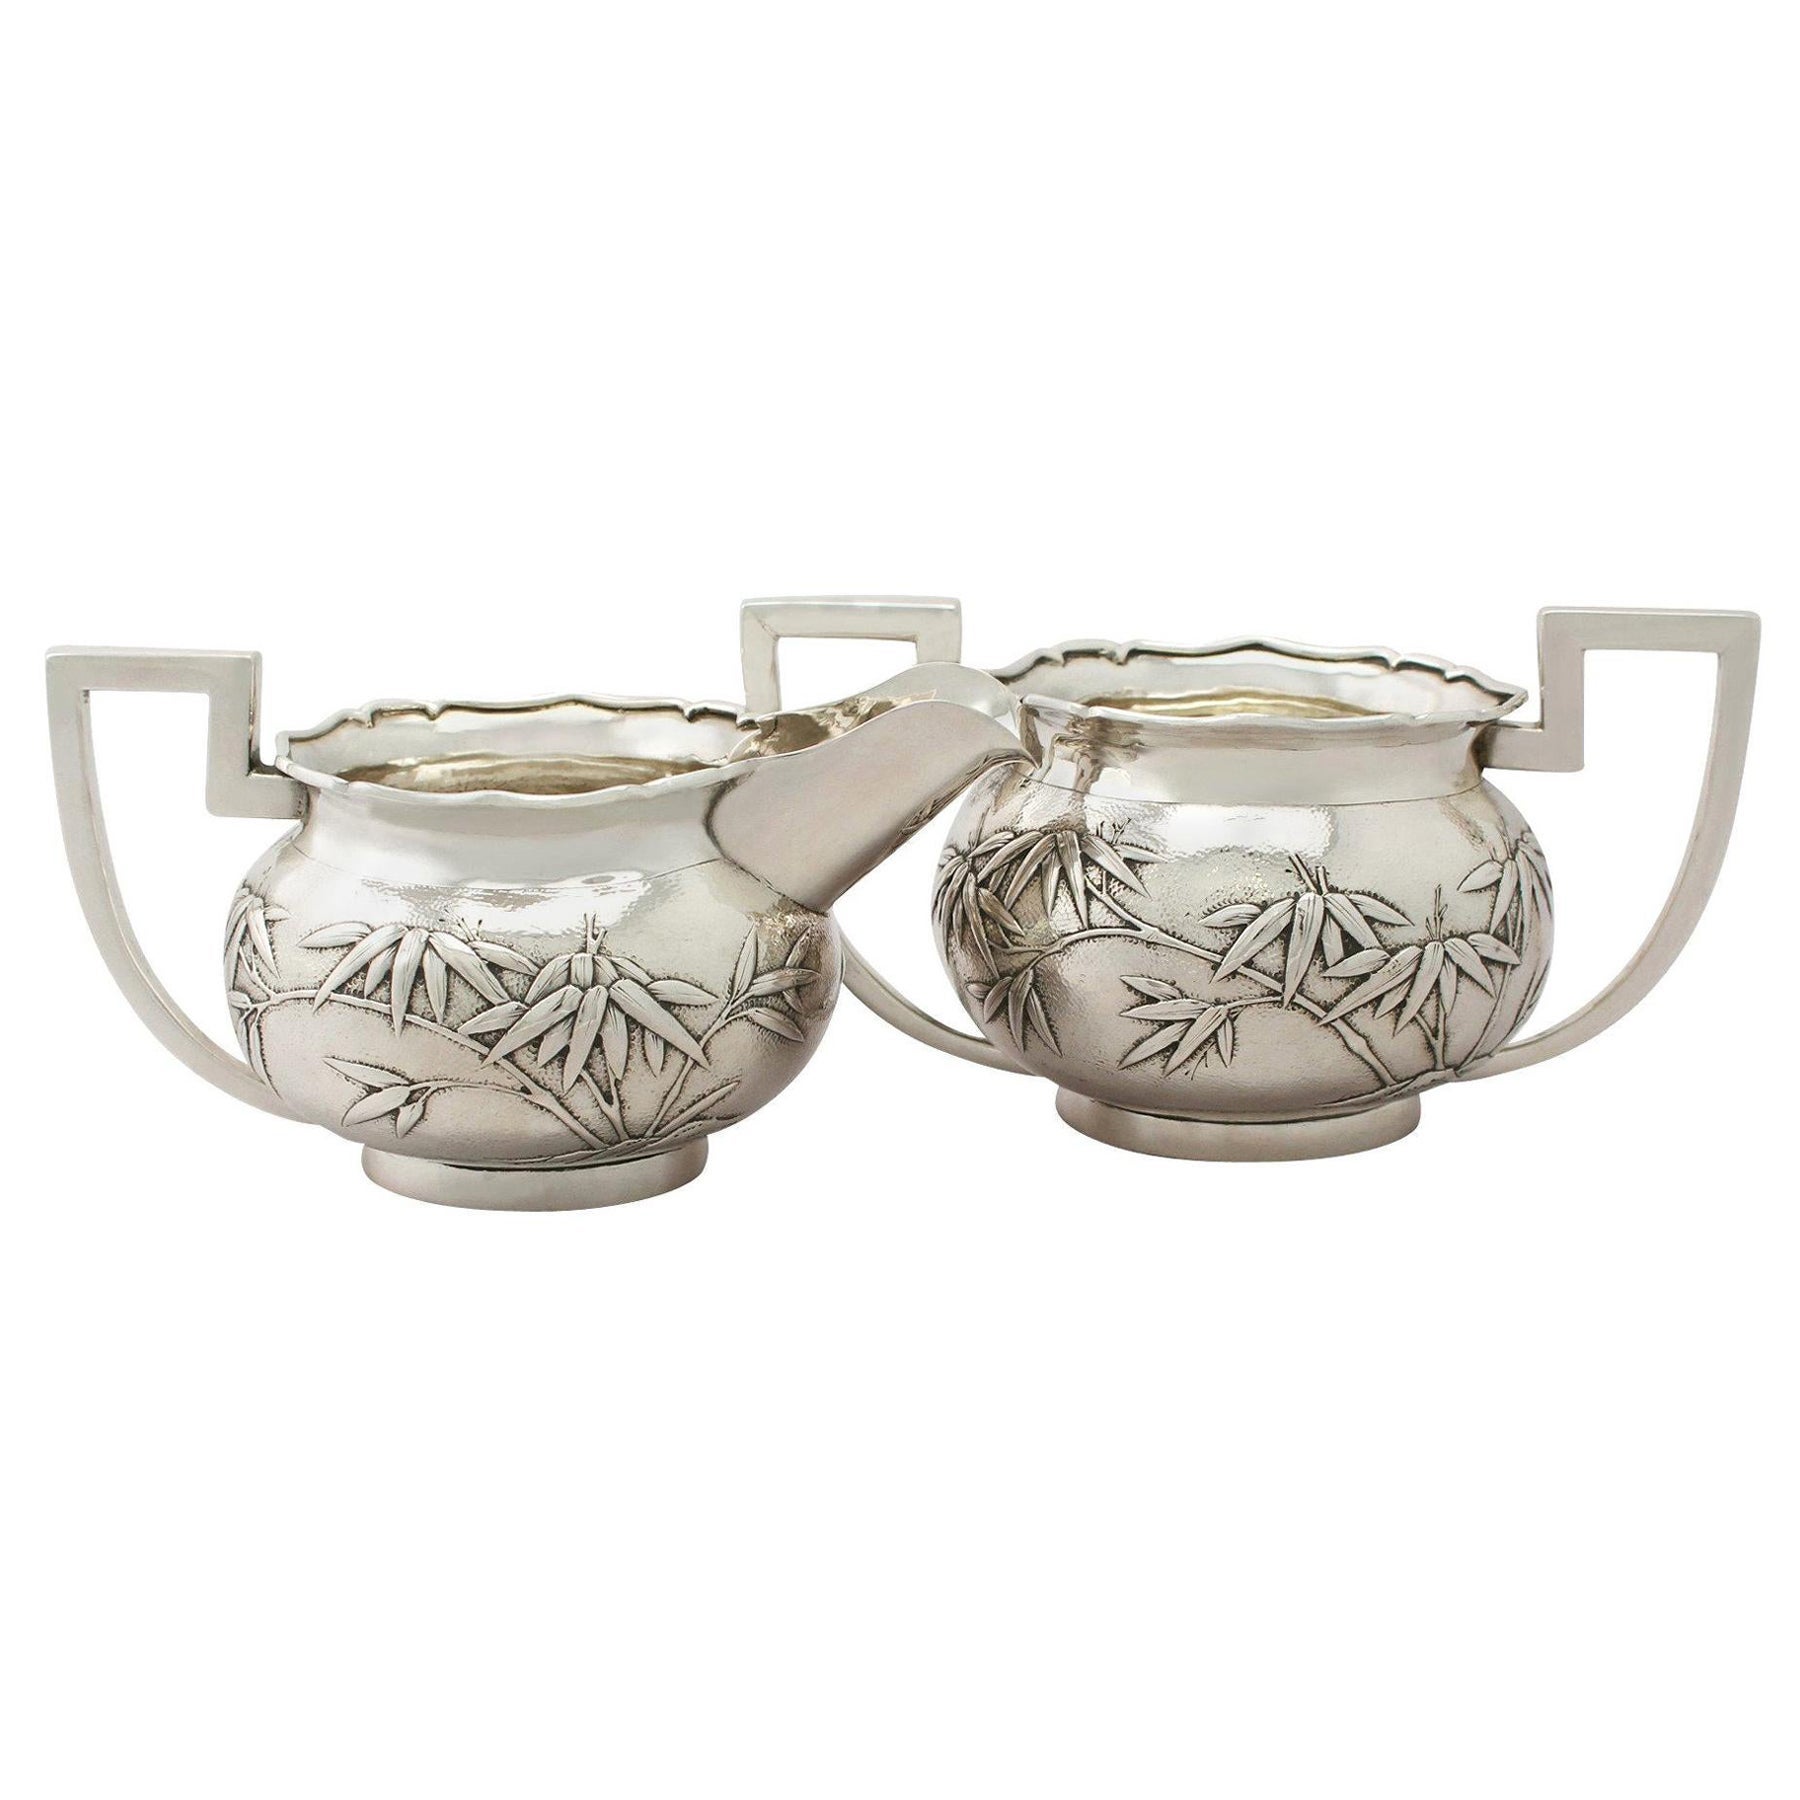 Antique Chinese Export Silver Cream Jug / Creamer and Sugar Bowl For Sale